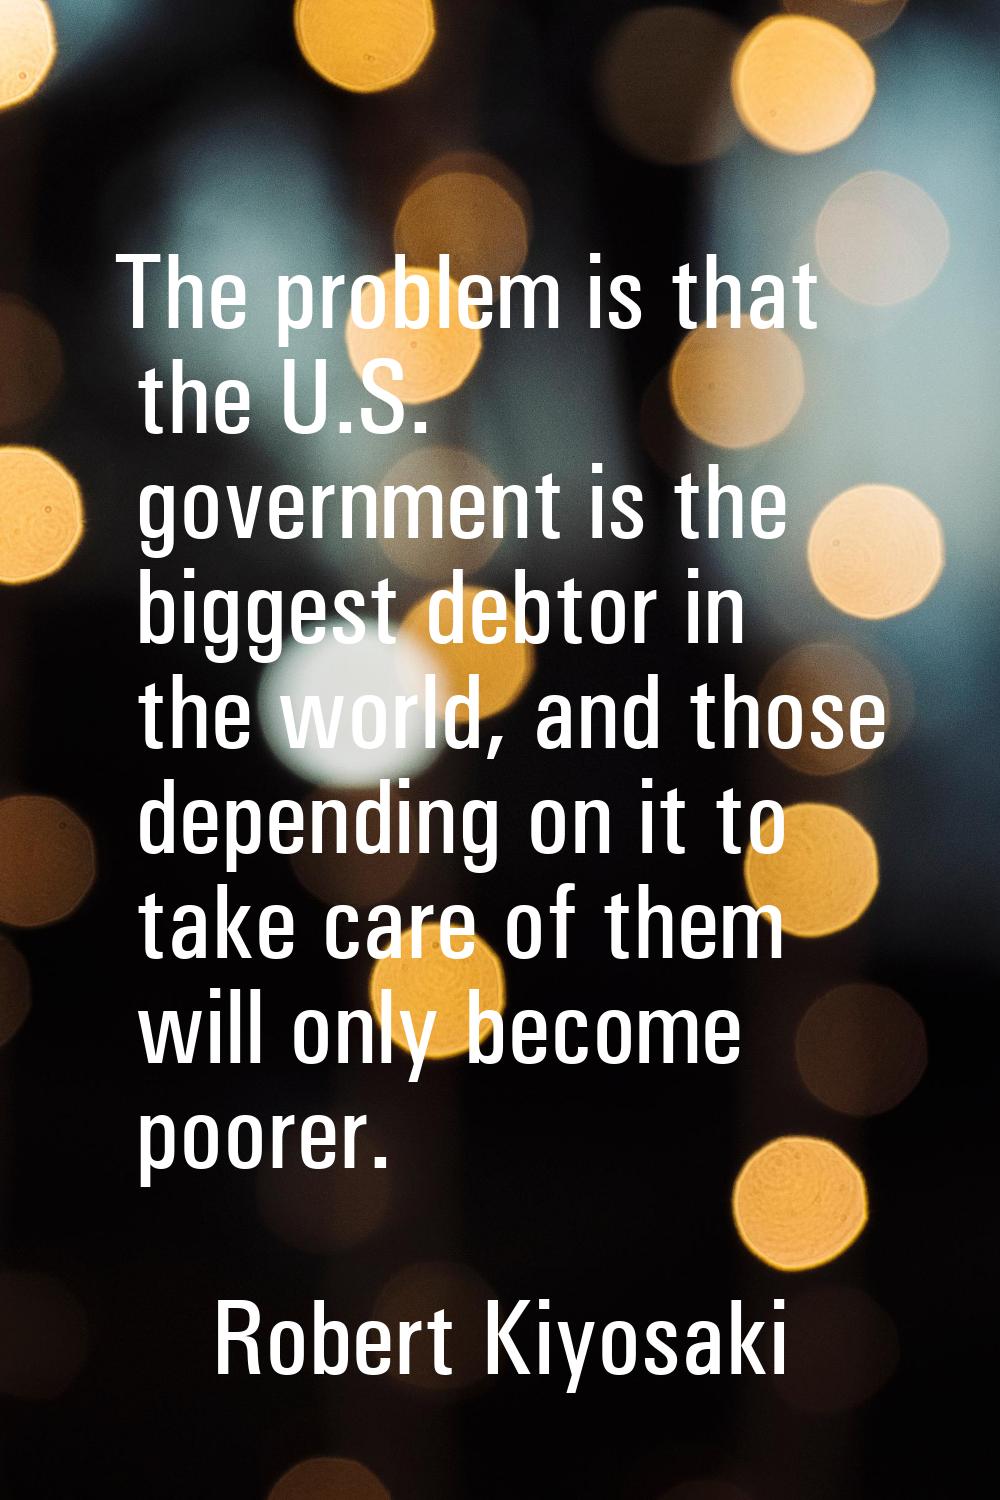 The problem is that the U.S. government is the biggest debtor in the world, and those depending on 